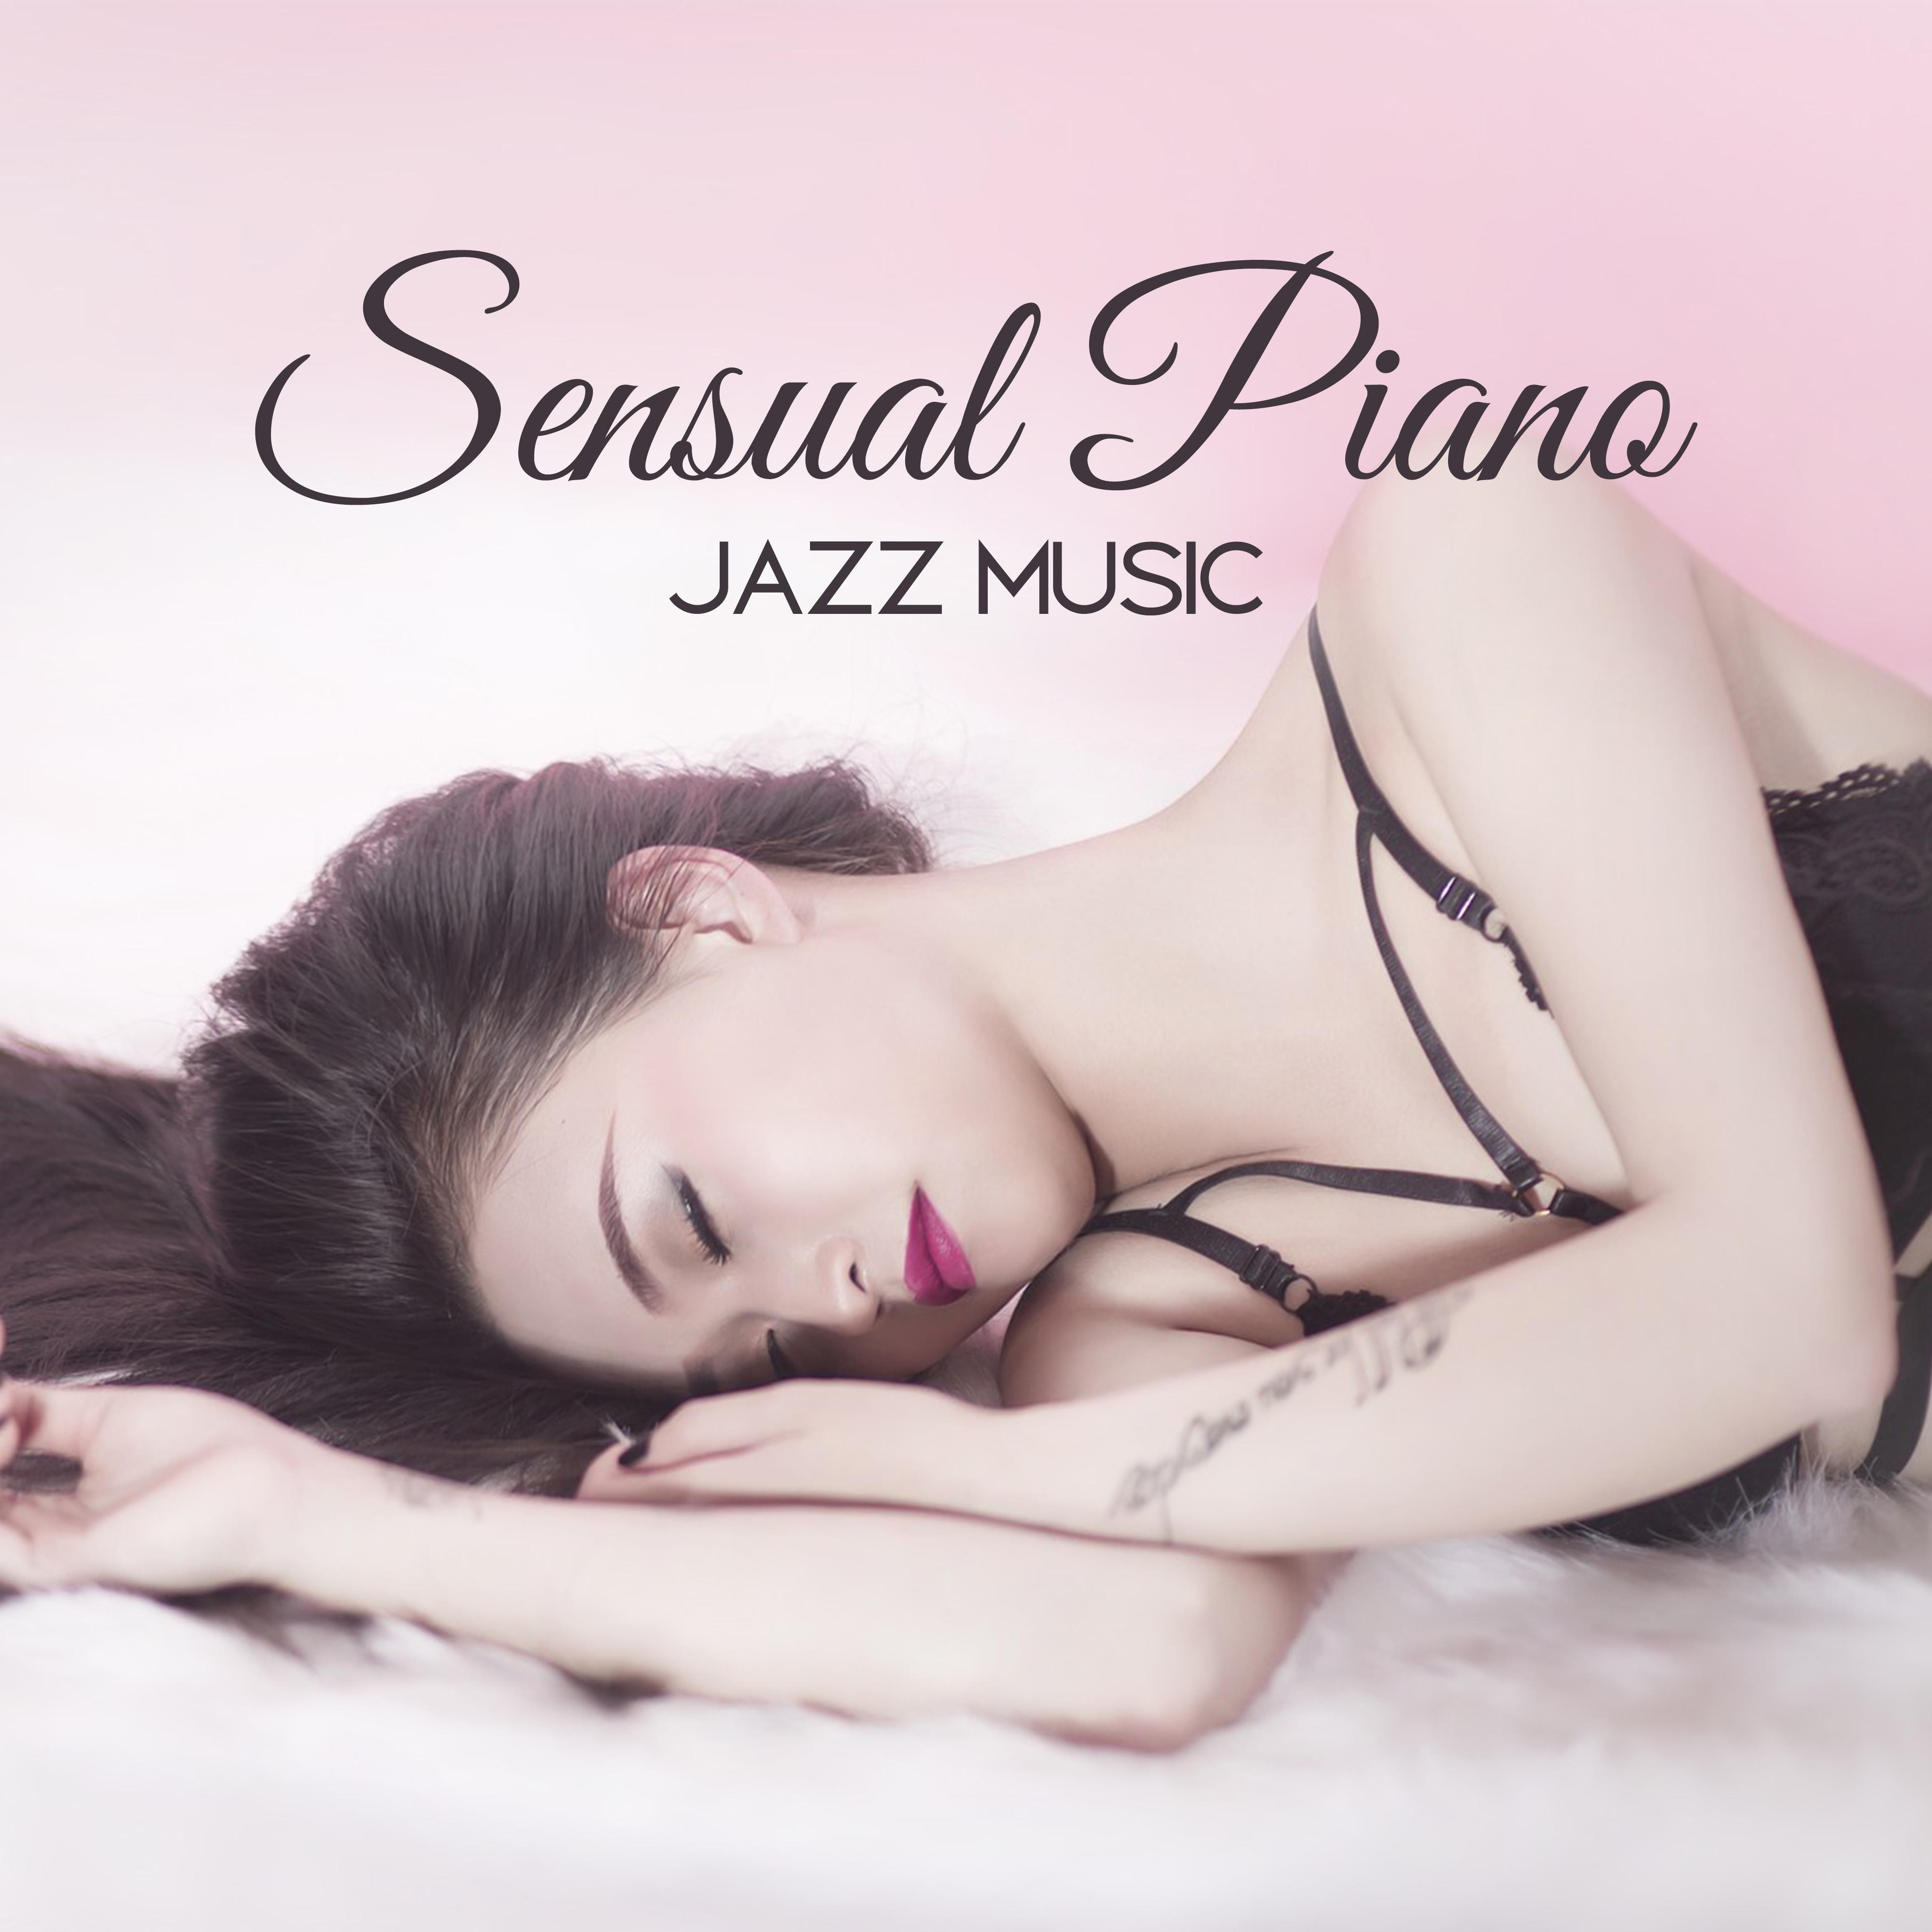 Sensual Piano Jazz Music  Easy Listening, Piano Jazz Relaxation, Smooth  Sensual Music, Chilled Evening